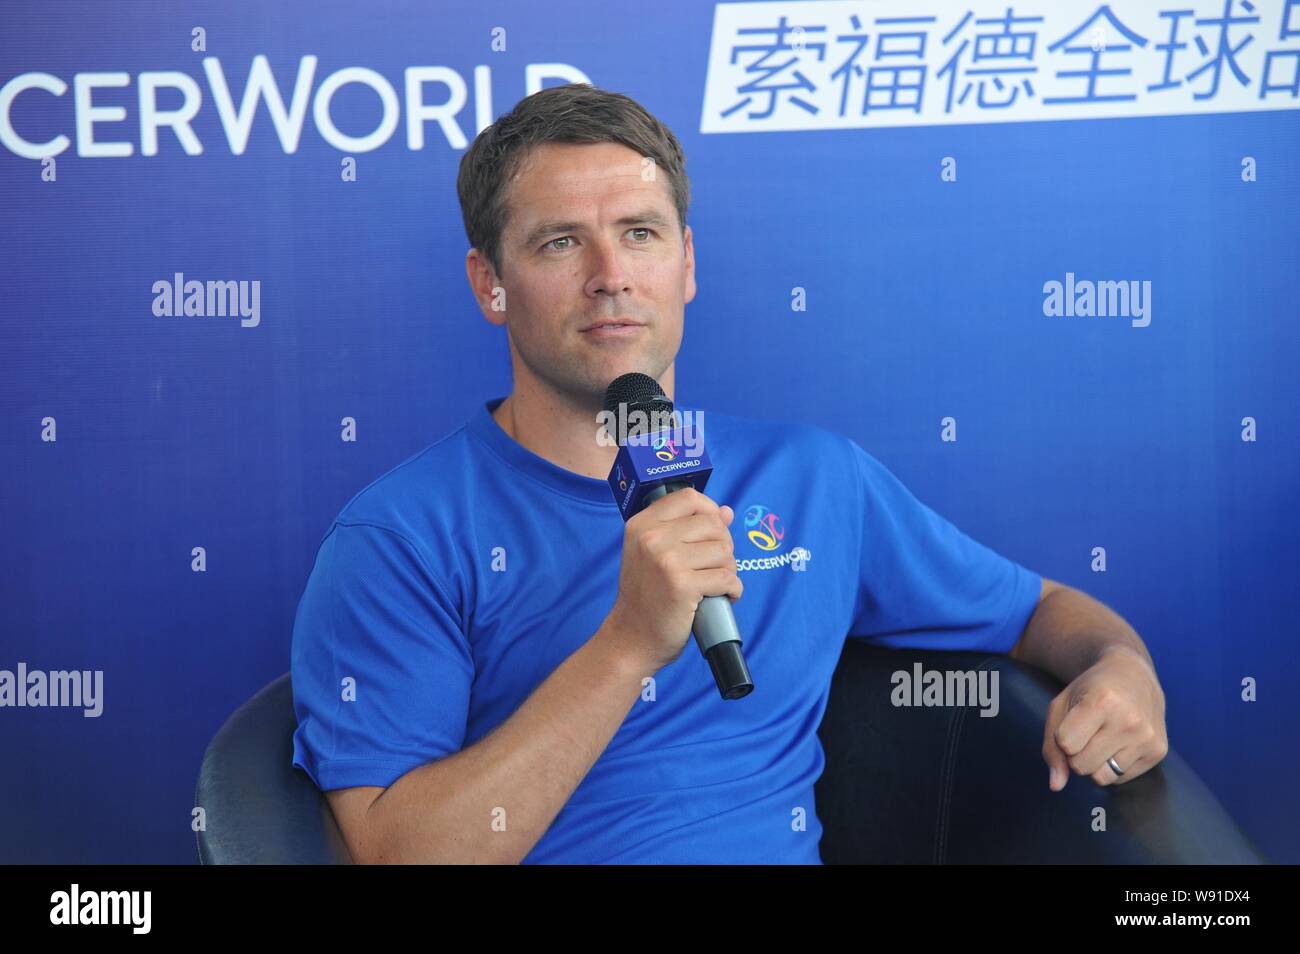 English soccer star Michael Owen speaks at a promotional event of European sports stadium business operator SoccerWorld during his China tour in Beiji Stock Photo